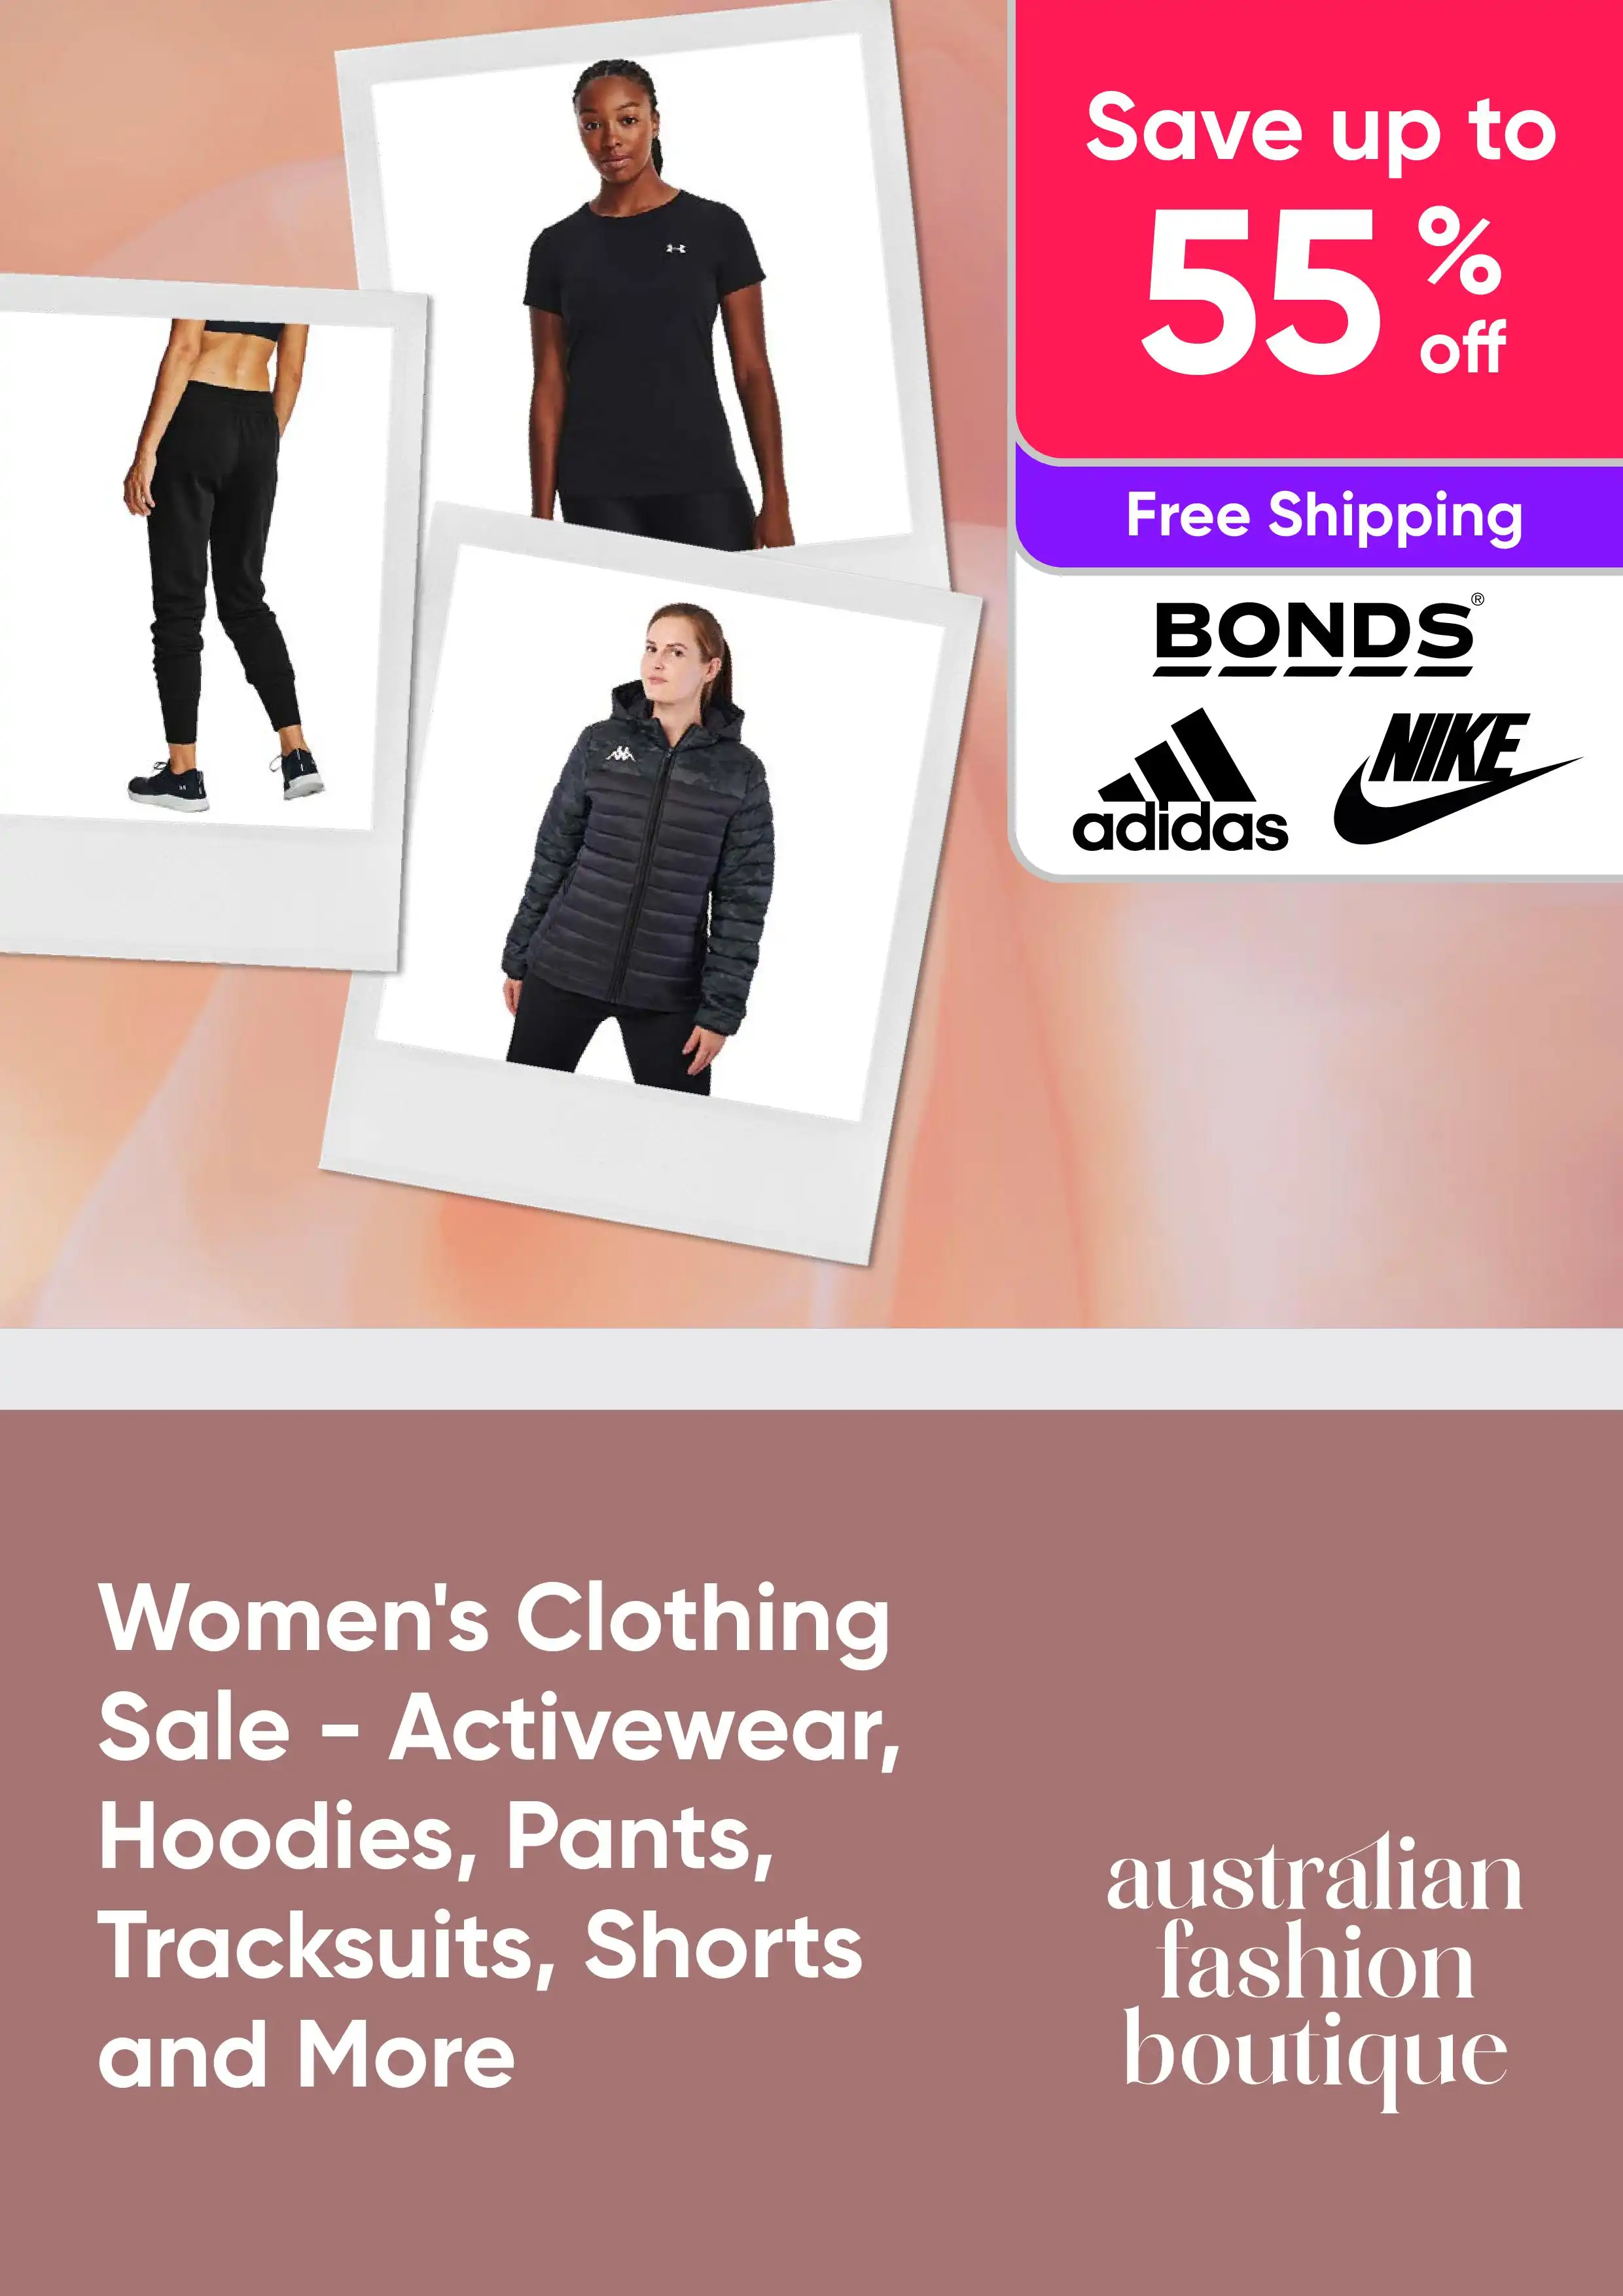 Save up to 55% Off A Range of Women's Clothing | Shop Activewear, Hoodies, Pants, Shorts and More